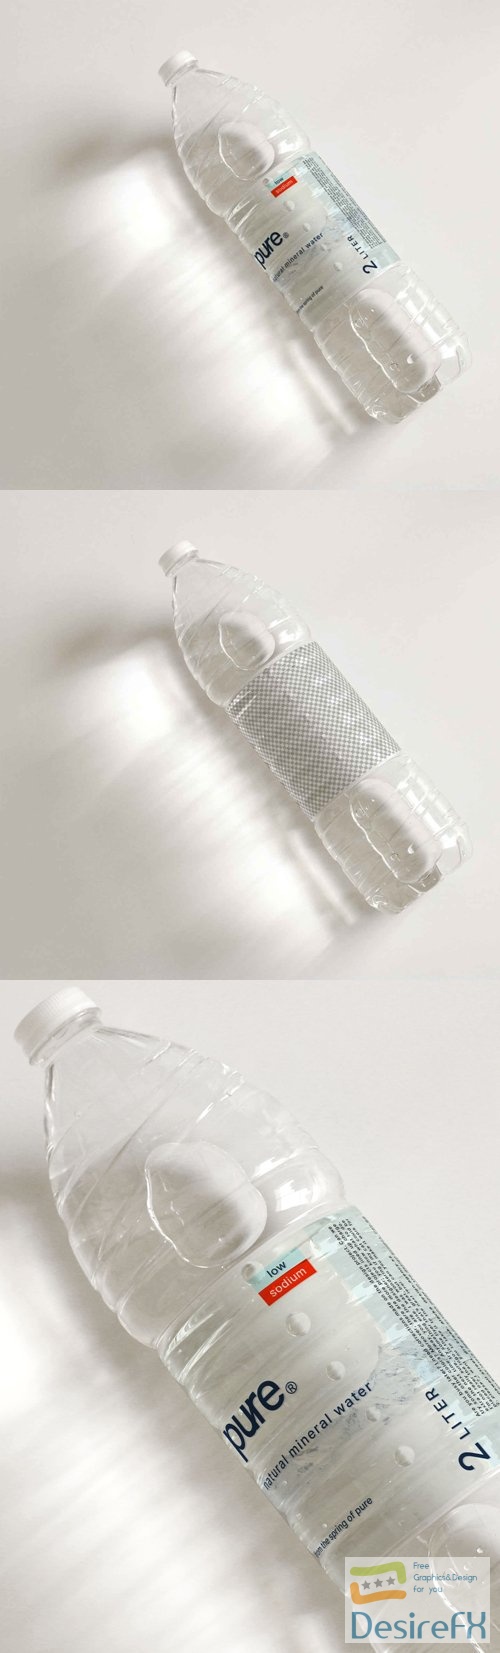 Plastic Water Bottle + Shadows & Light Reflections - PSD Mockup Template